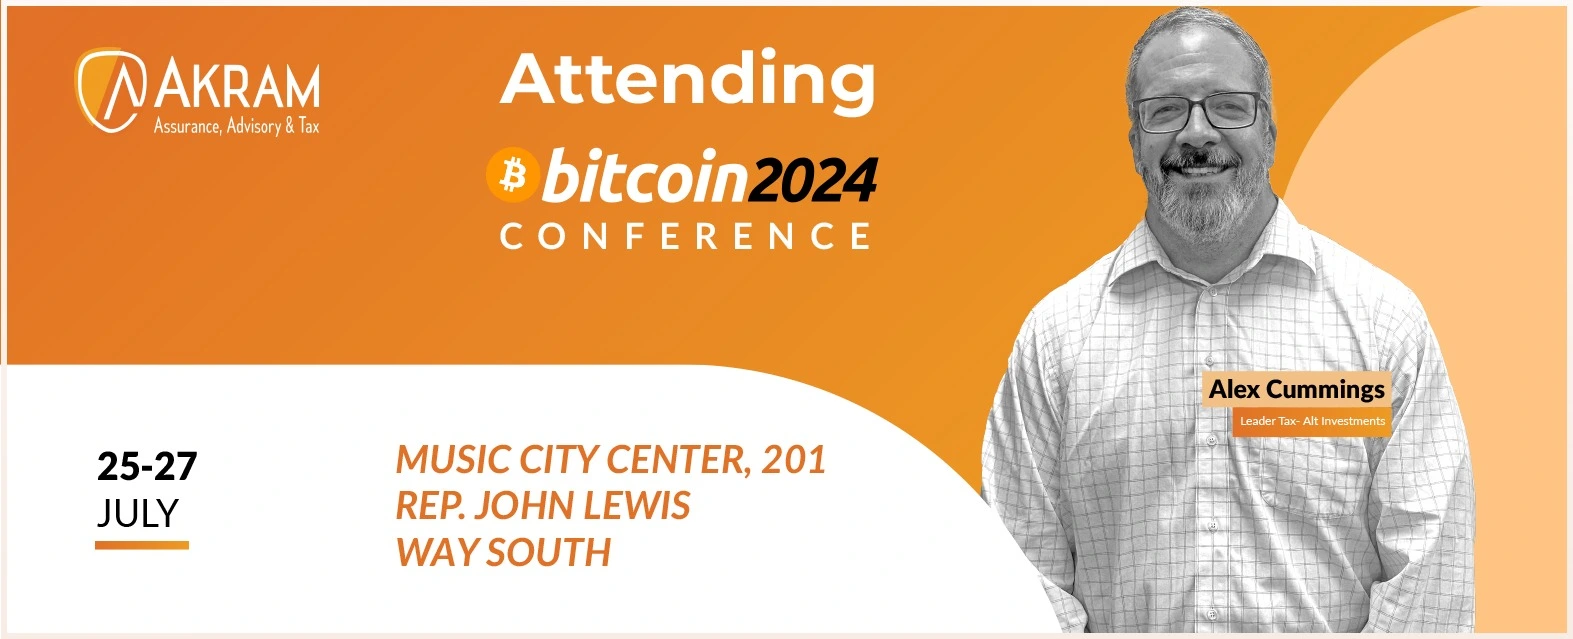 Bitcoin Conference 2024